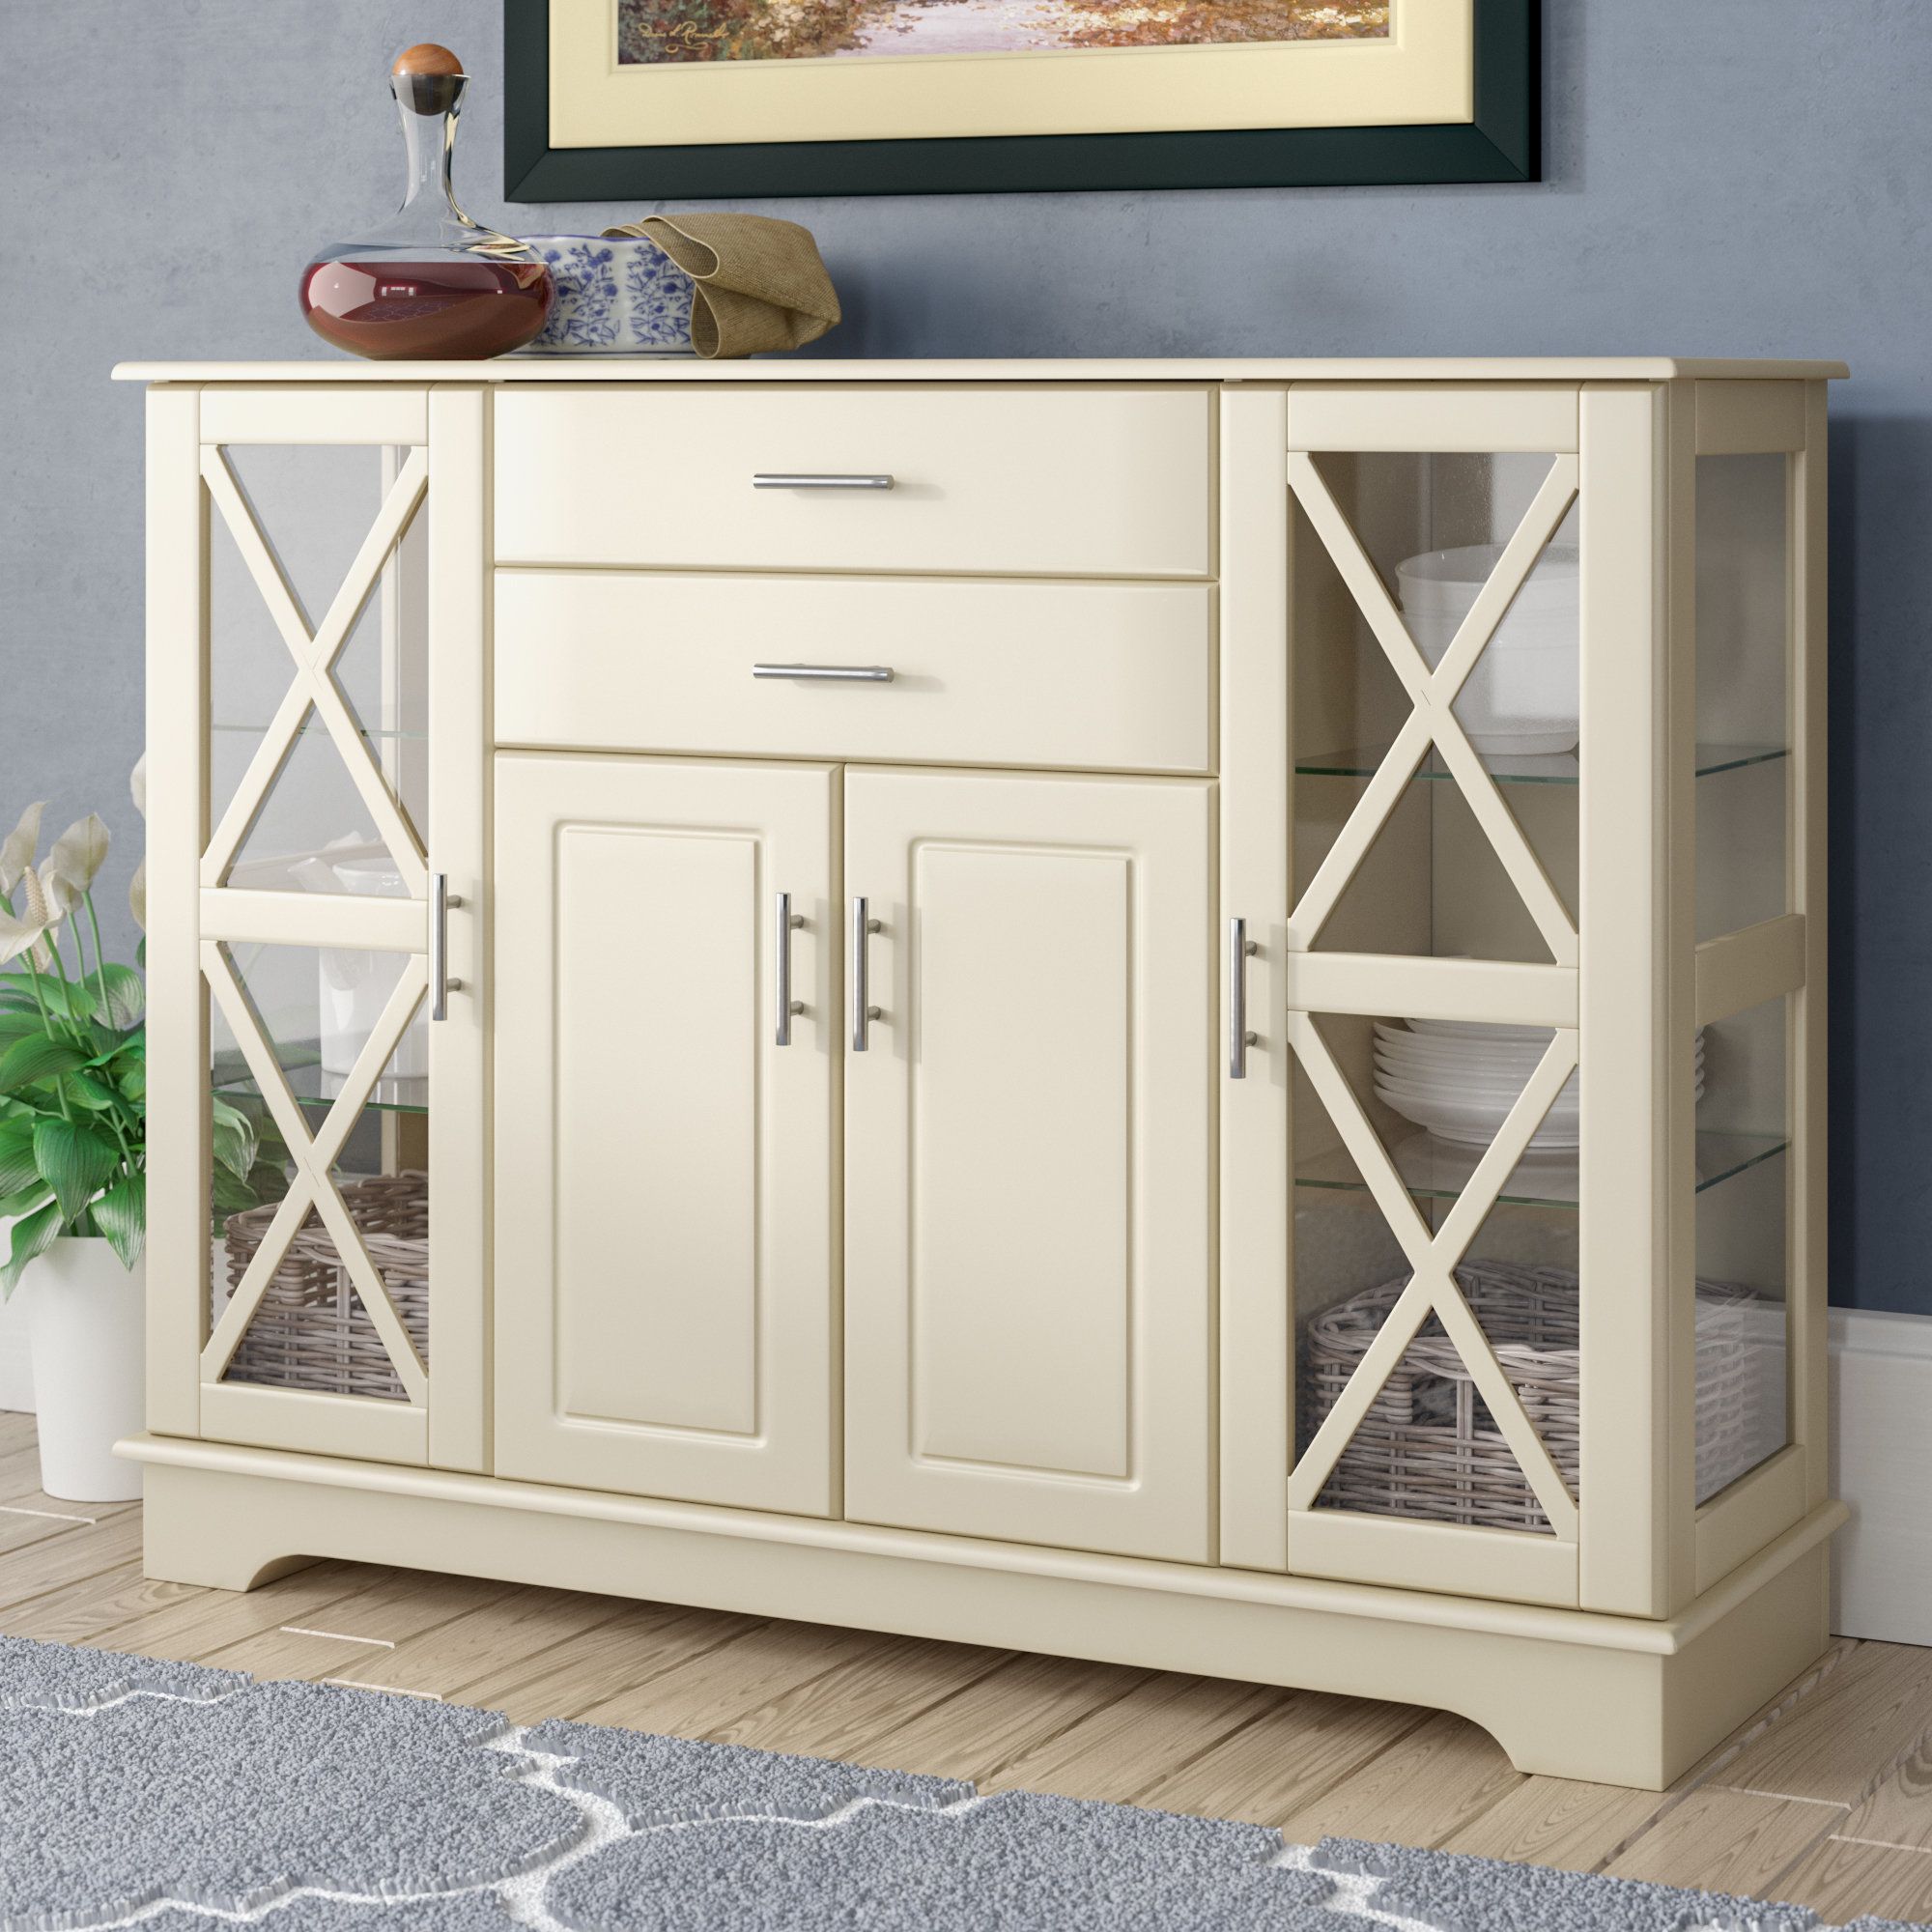 Narrow Dining Room Sideboards | Wayfair Intended For Pineville Dining Sideboards (Gallery 10 of 20)